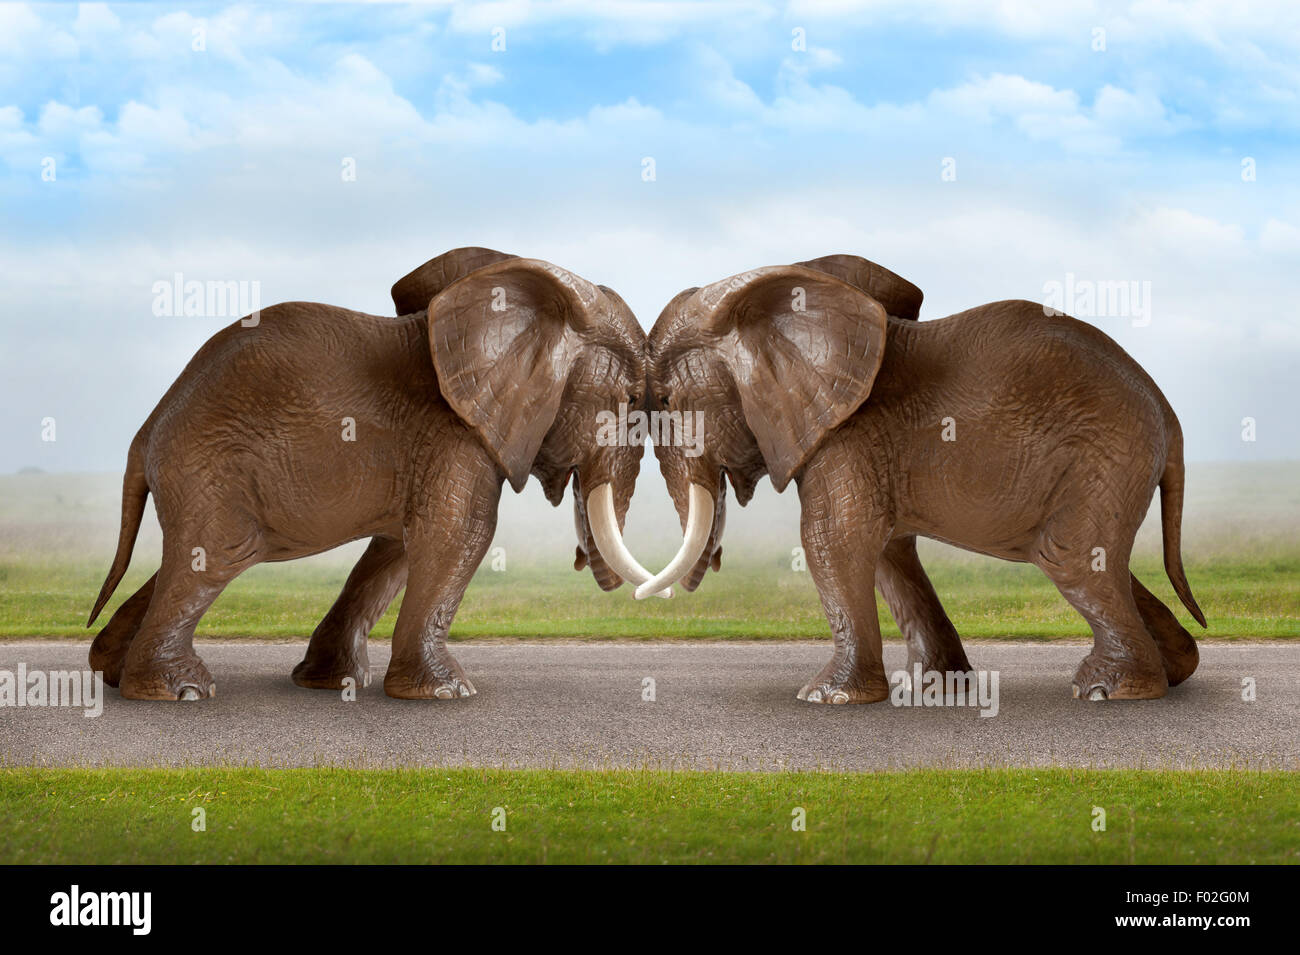 test of strength concept elephants pushing against each other Stock Photo